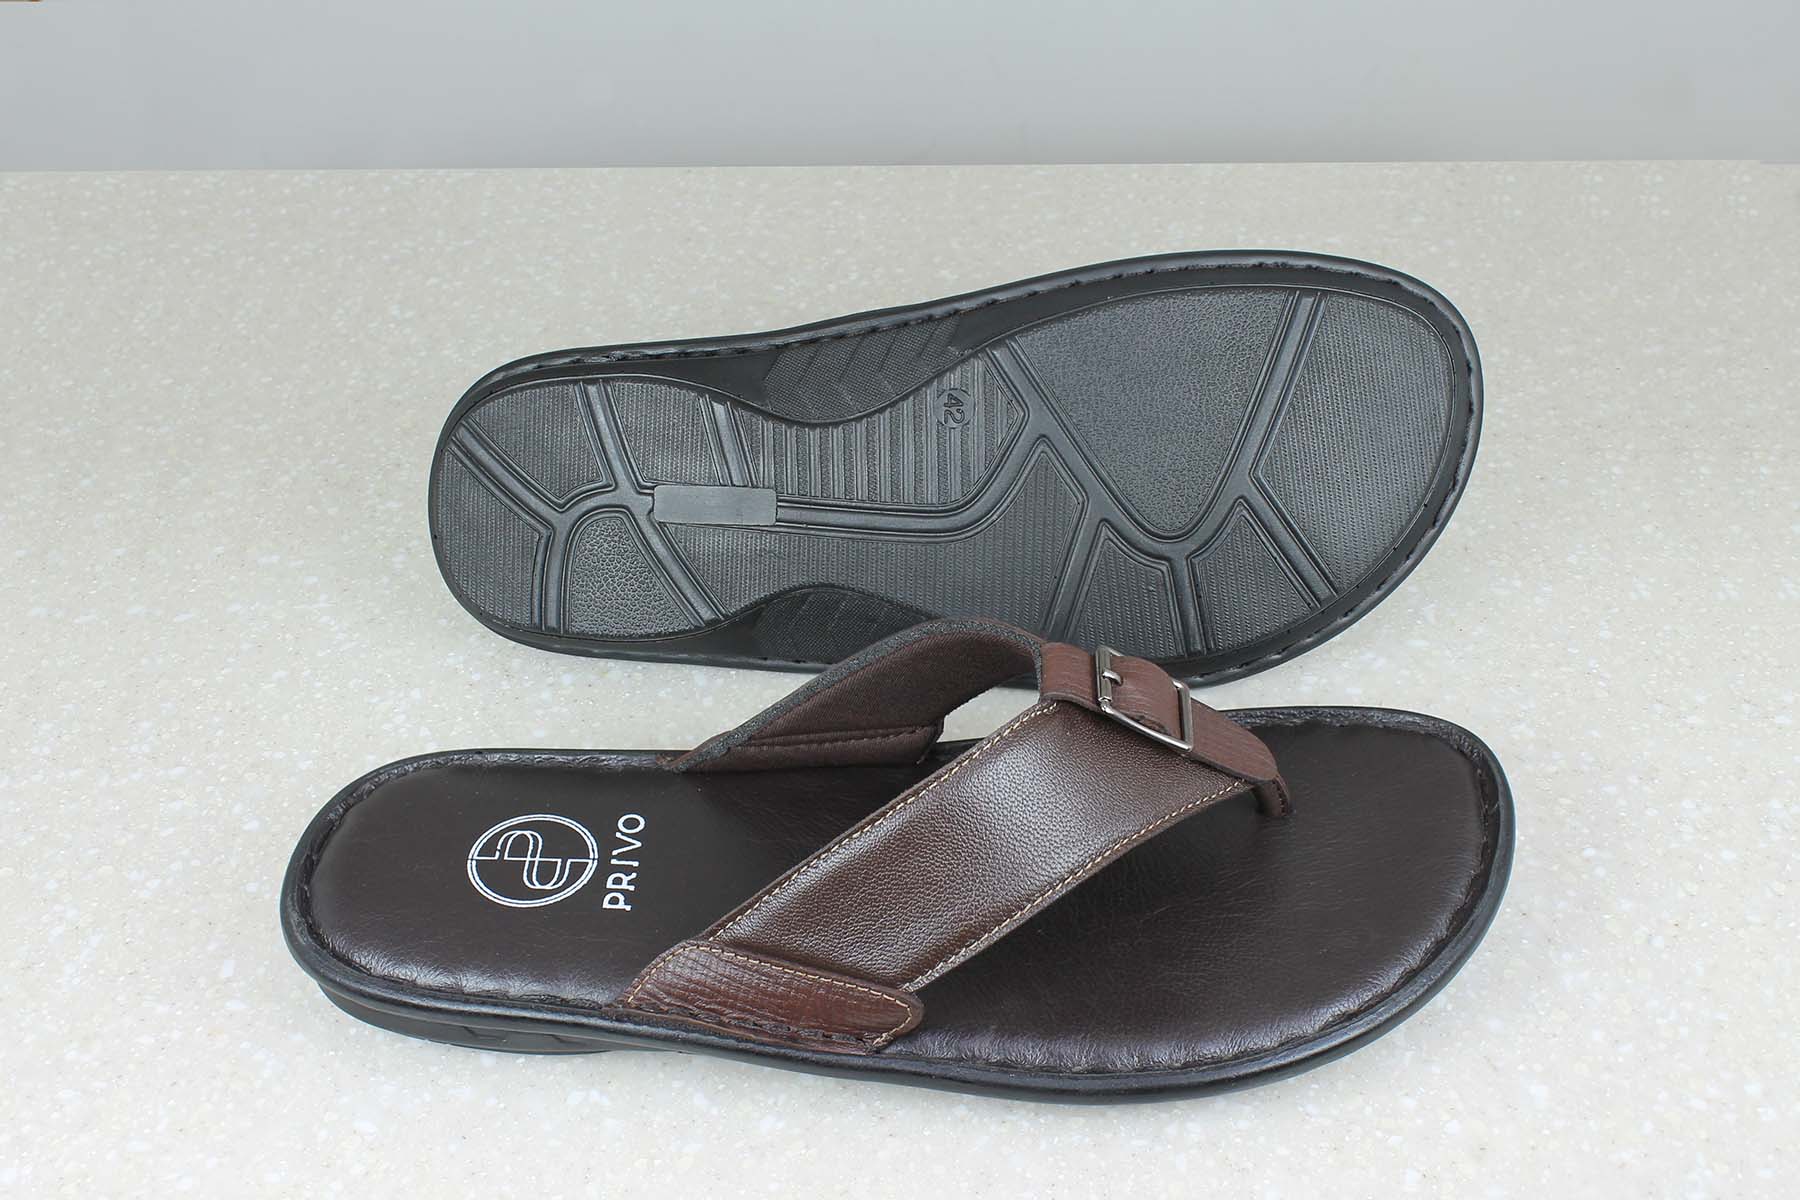 THONG SLIPPERS-BROWN-Men's Slippers-Inc5 Shoes